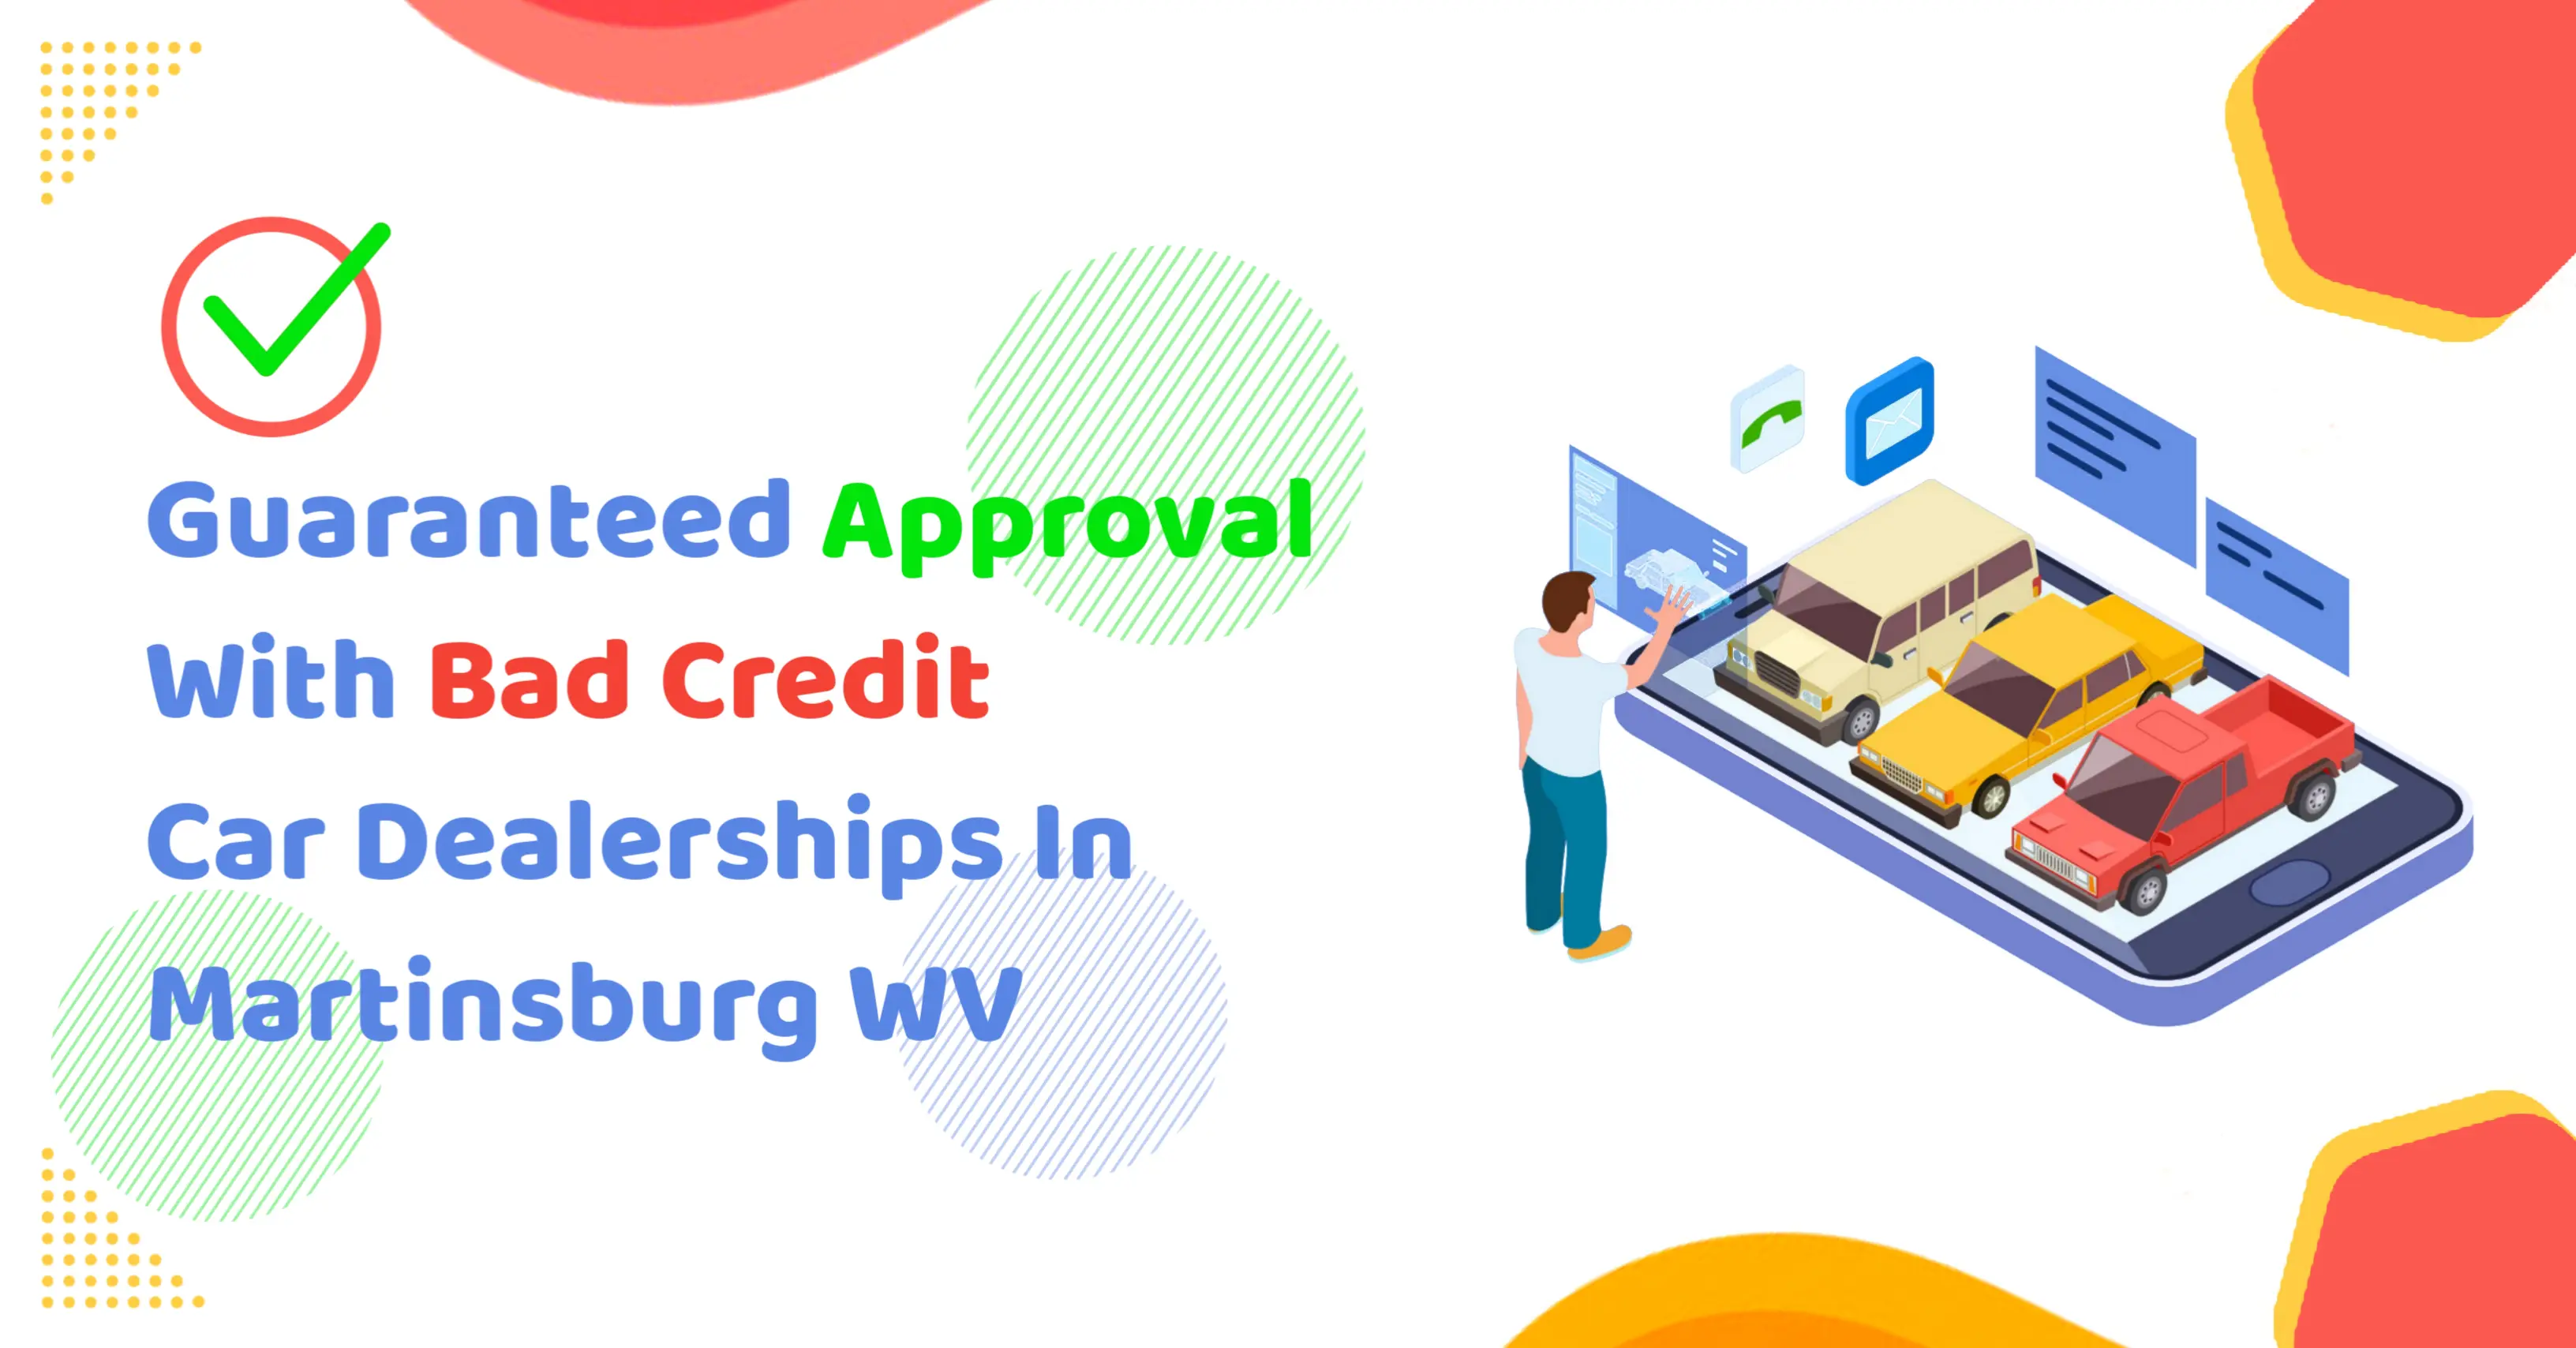 Guaranteed Approval With Bad Credit Car Dealerships in Martinsburg WV